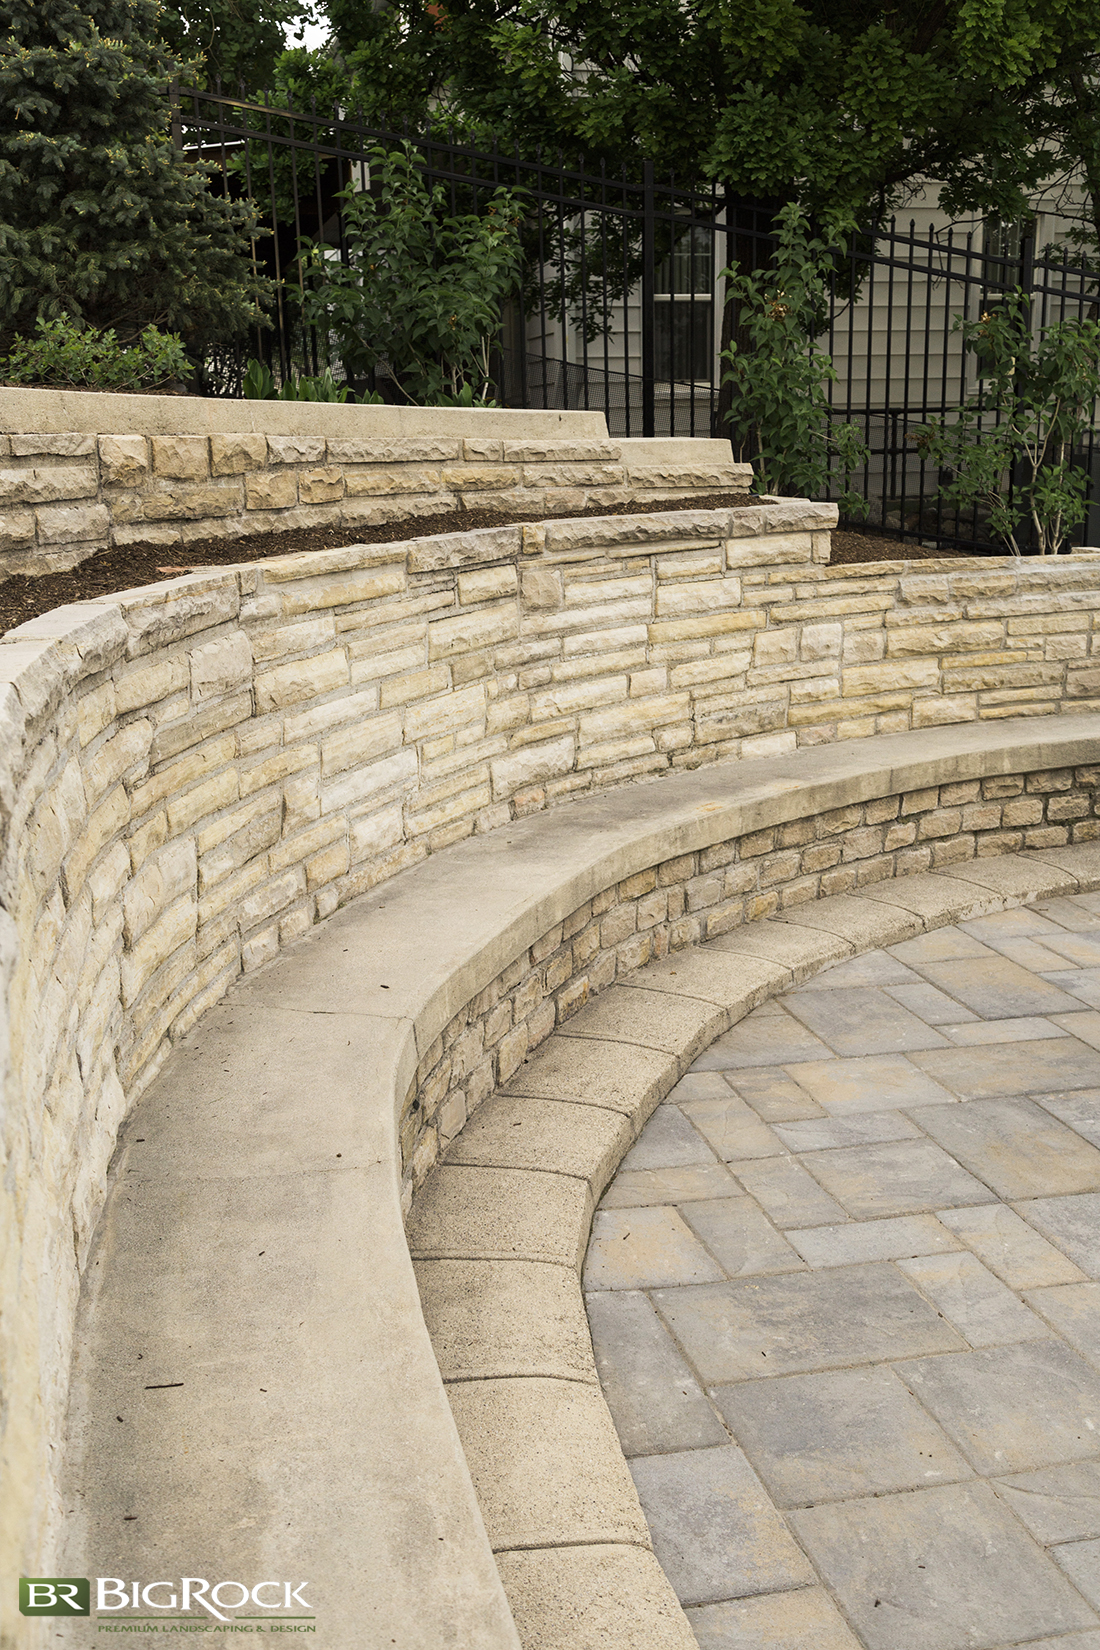 Retaining walls can help prevent water runoff, and can also create more usable space from a steeply graded landscape